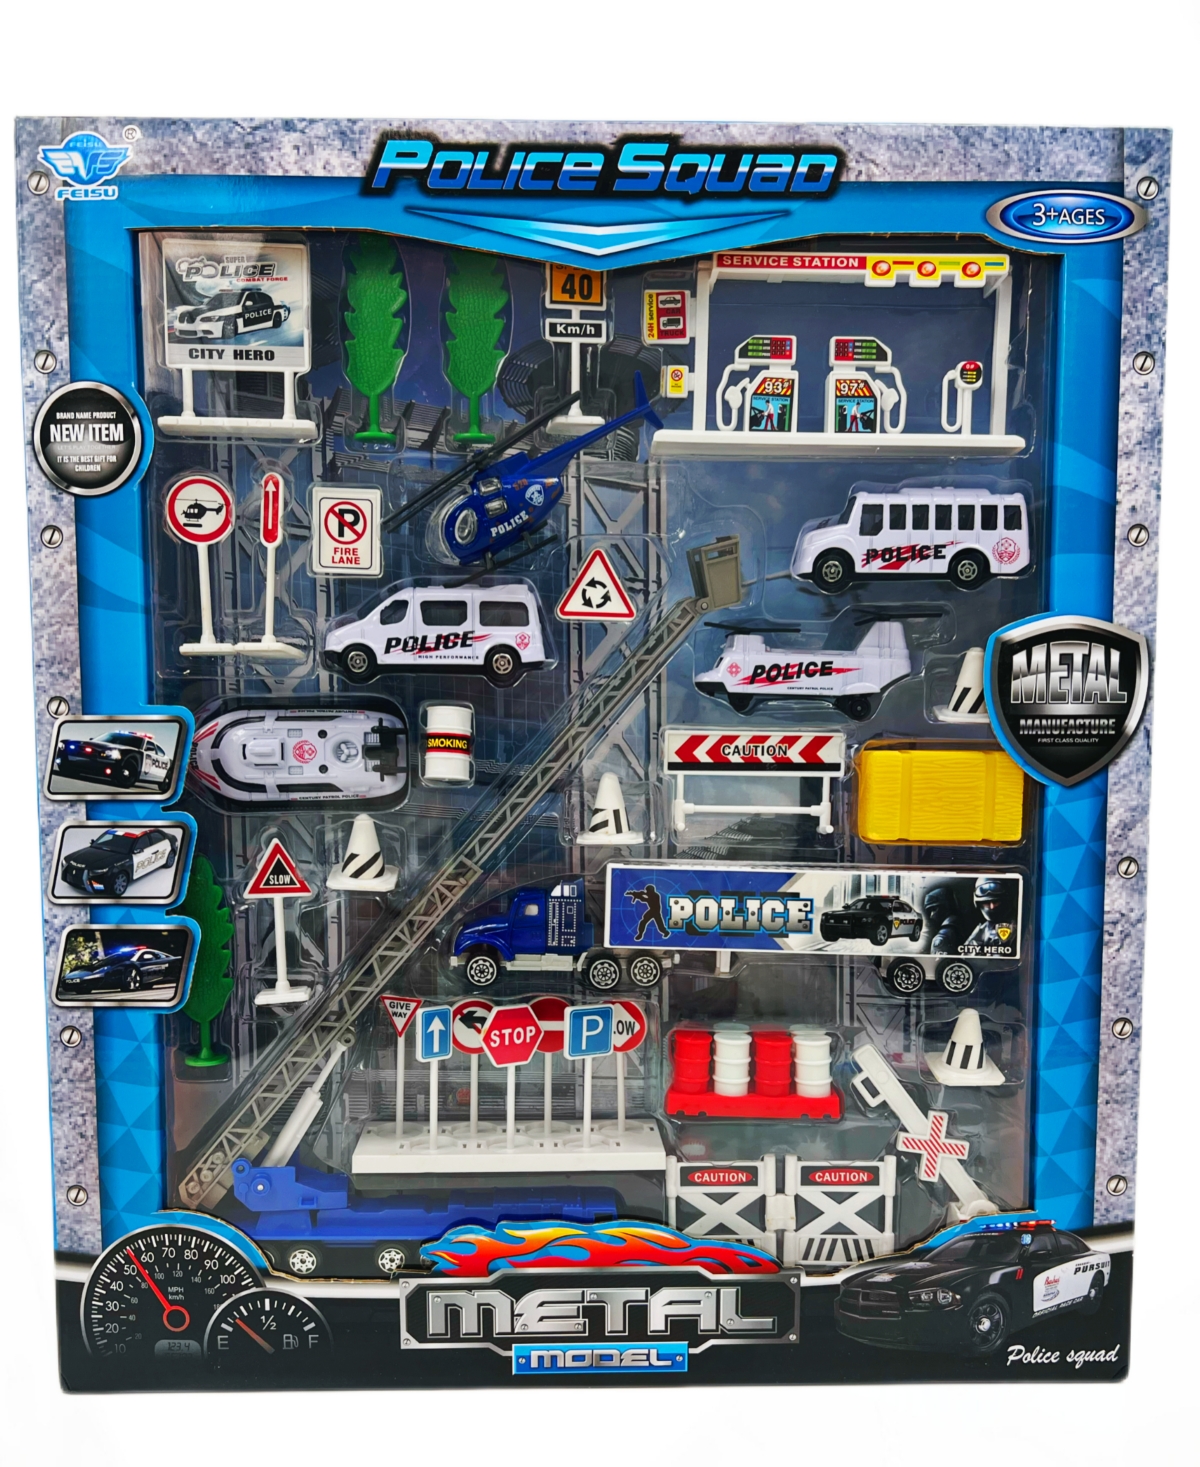 Big Daddy 40 Piece Mini 911 Serve Protect Squad Unit Patrolling Trucks And Cars Accessories Playset In Multi